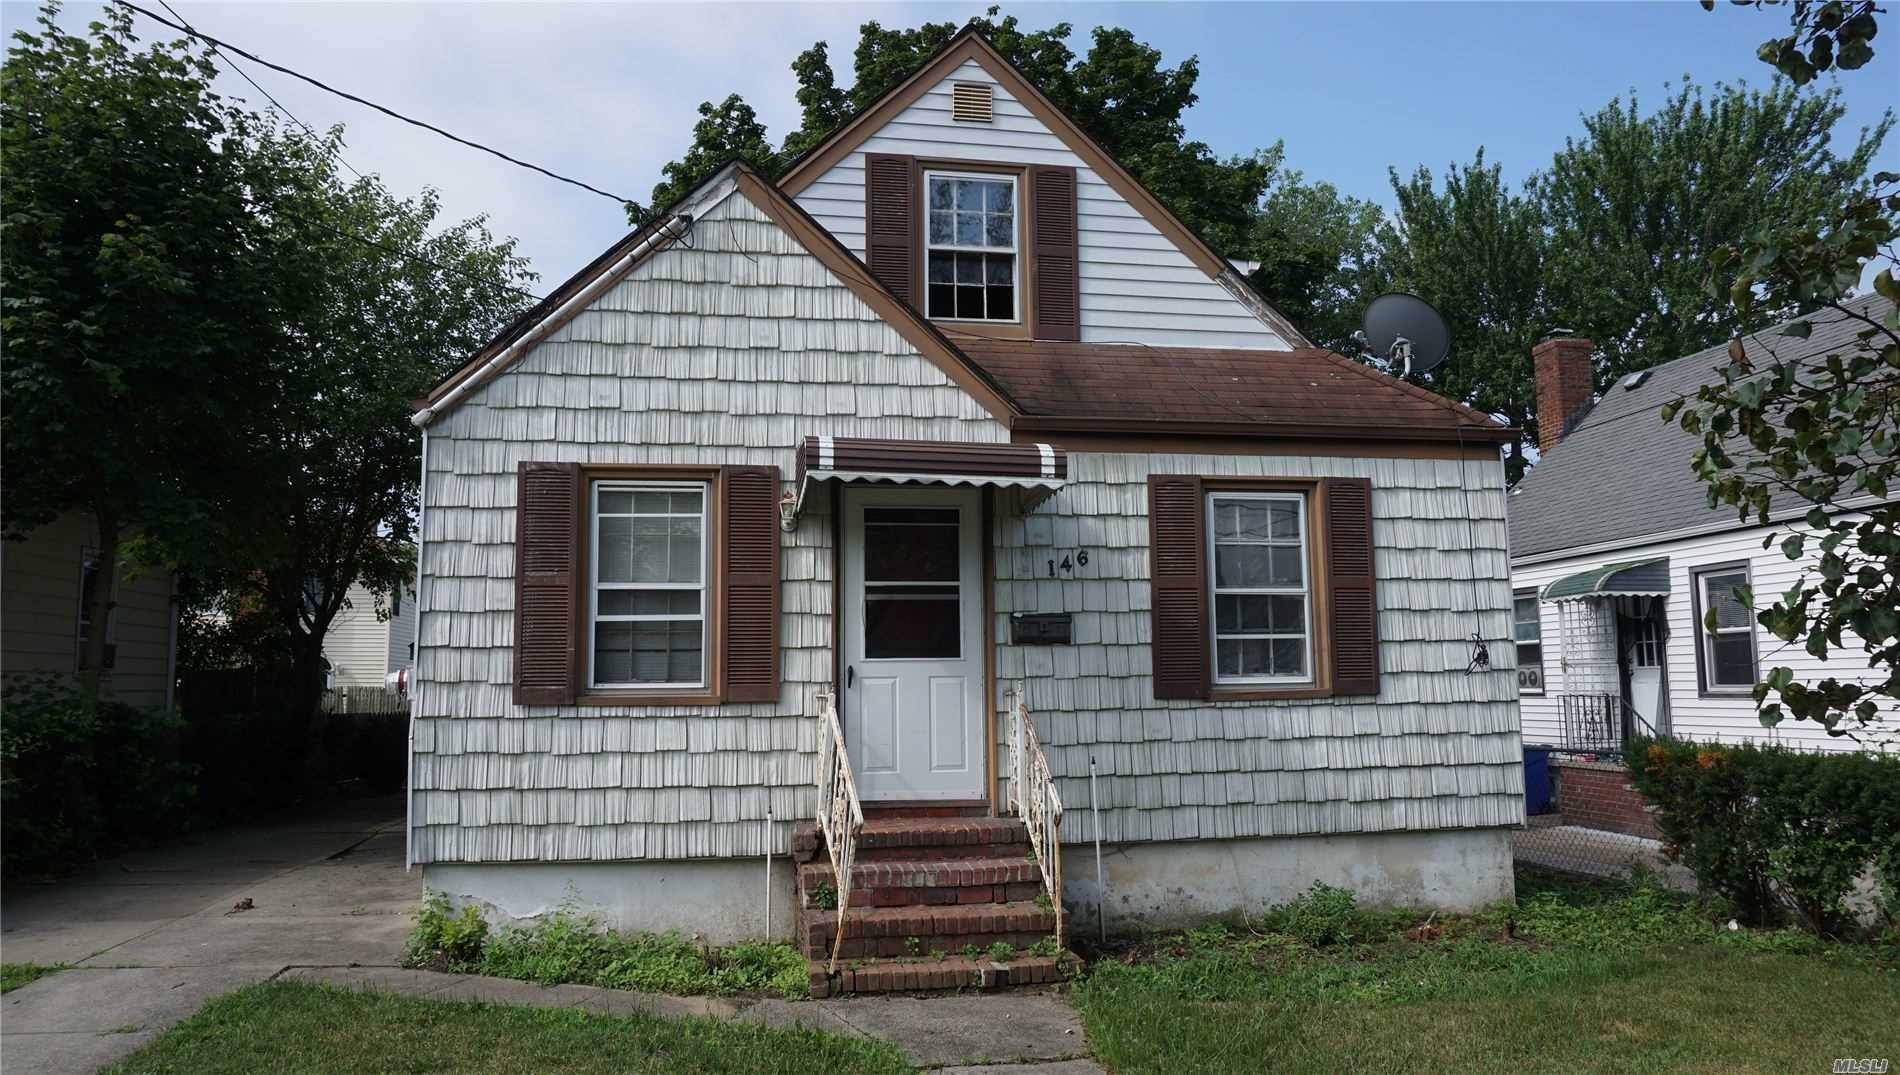 permits in process to be completely renovated 4 bedrooms, 2 full bath, new kitchen and appliances, full finished basement, new siding and roofing to installed you can choose all finishes ...